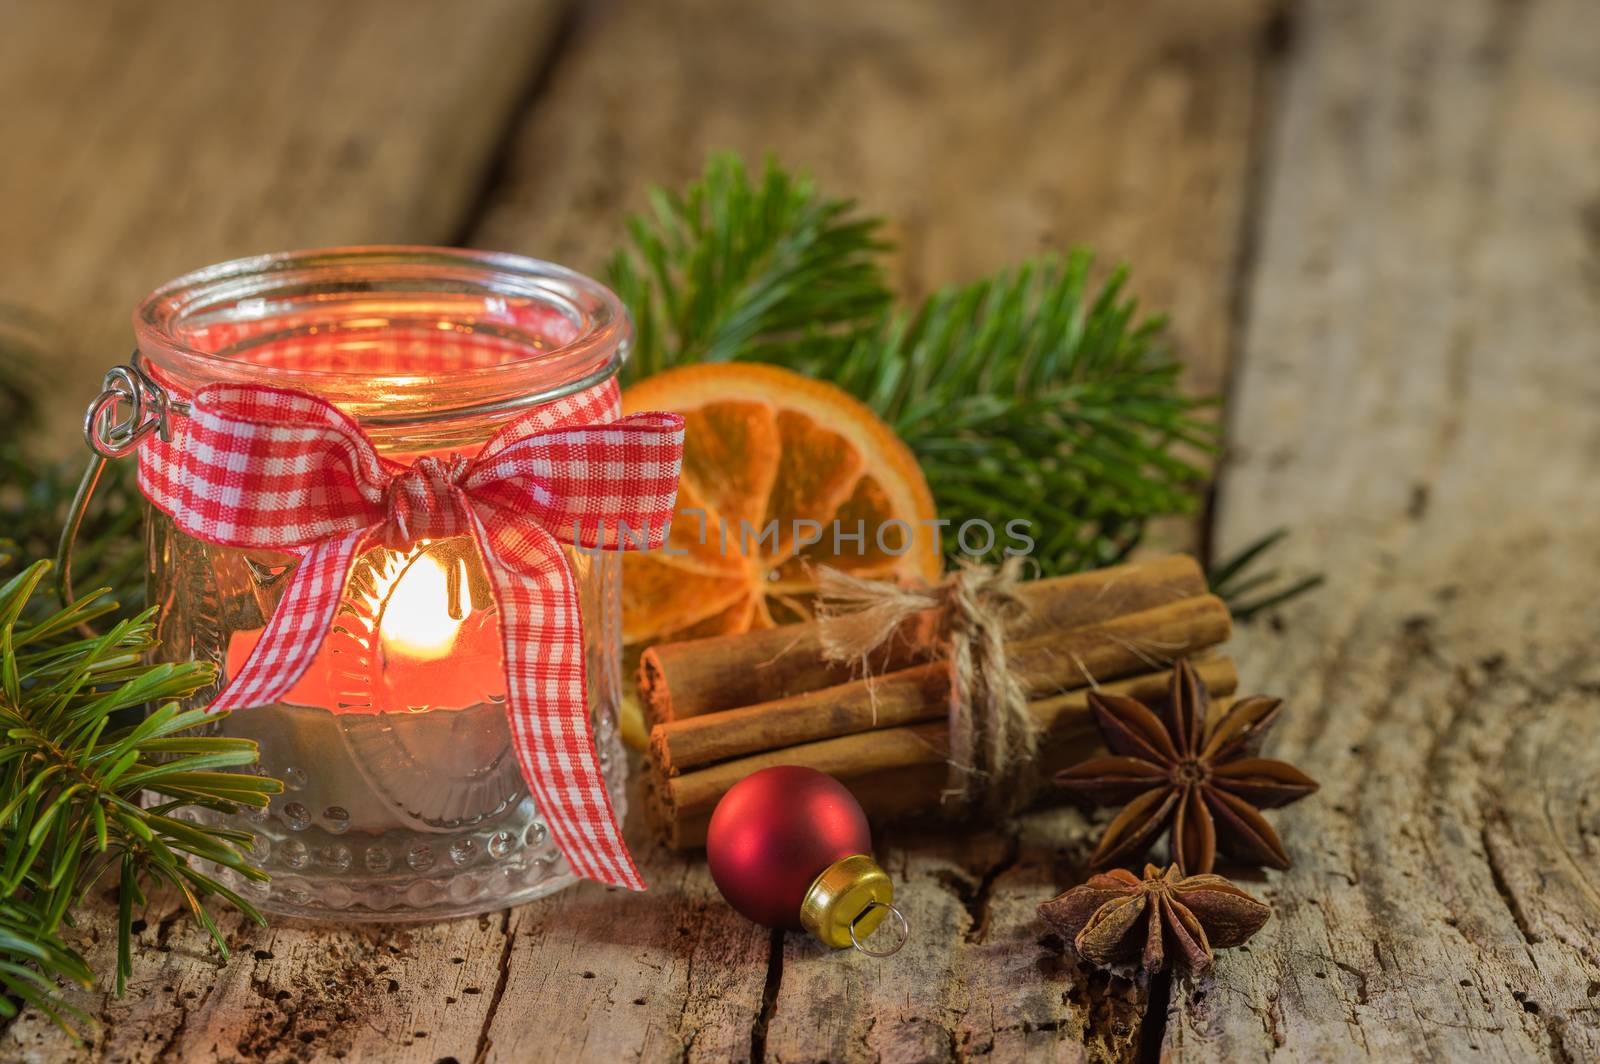 Rustic Christmas candle in lantern with ribbon and rustic decorations by Vulcano